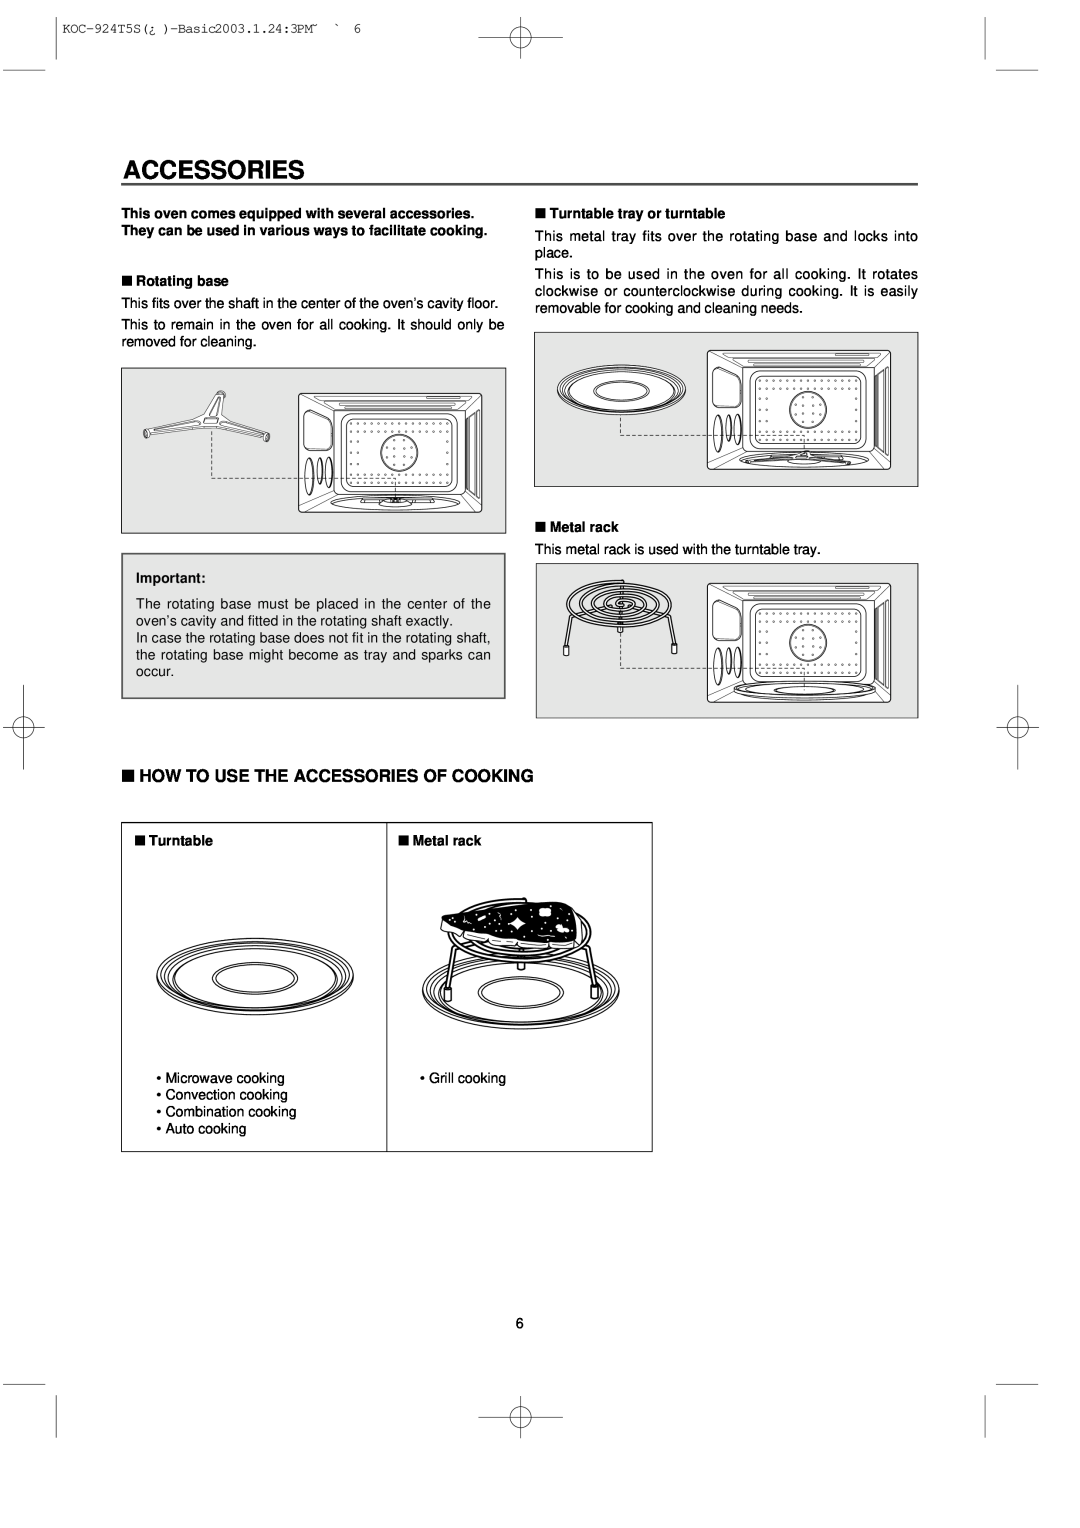 Daewoo KOC-924T5S, KOC-924T0S owner manual How To Use The Accessories Of Cooking 